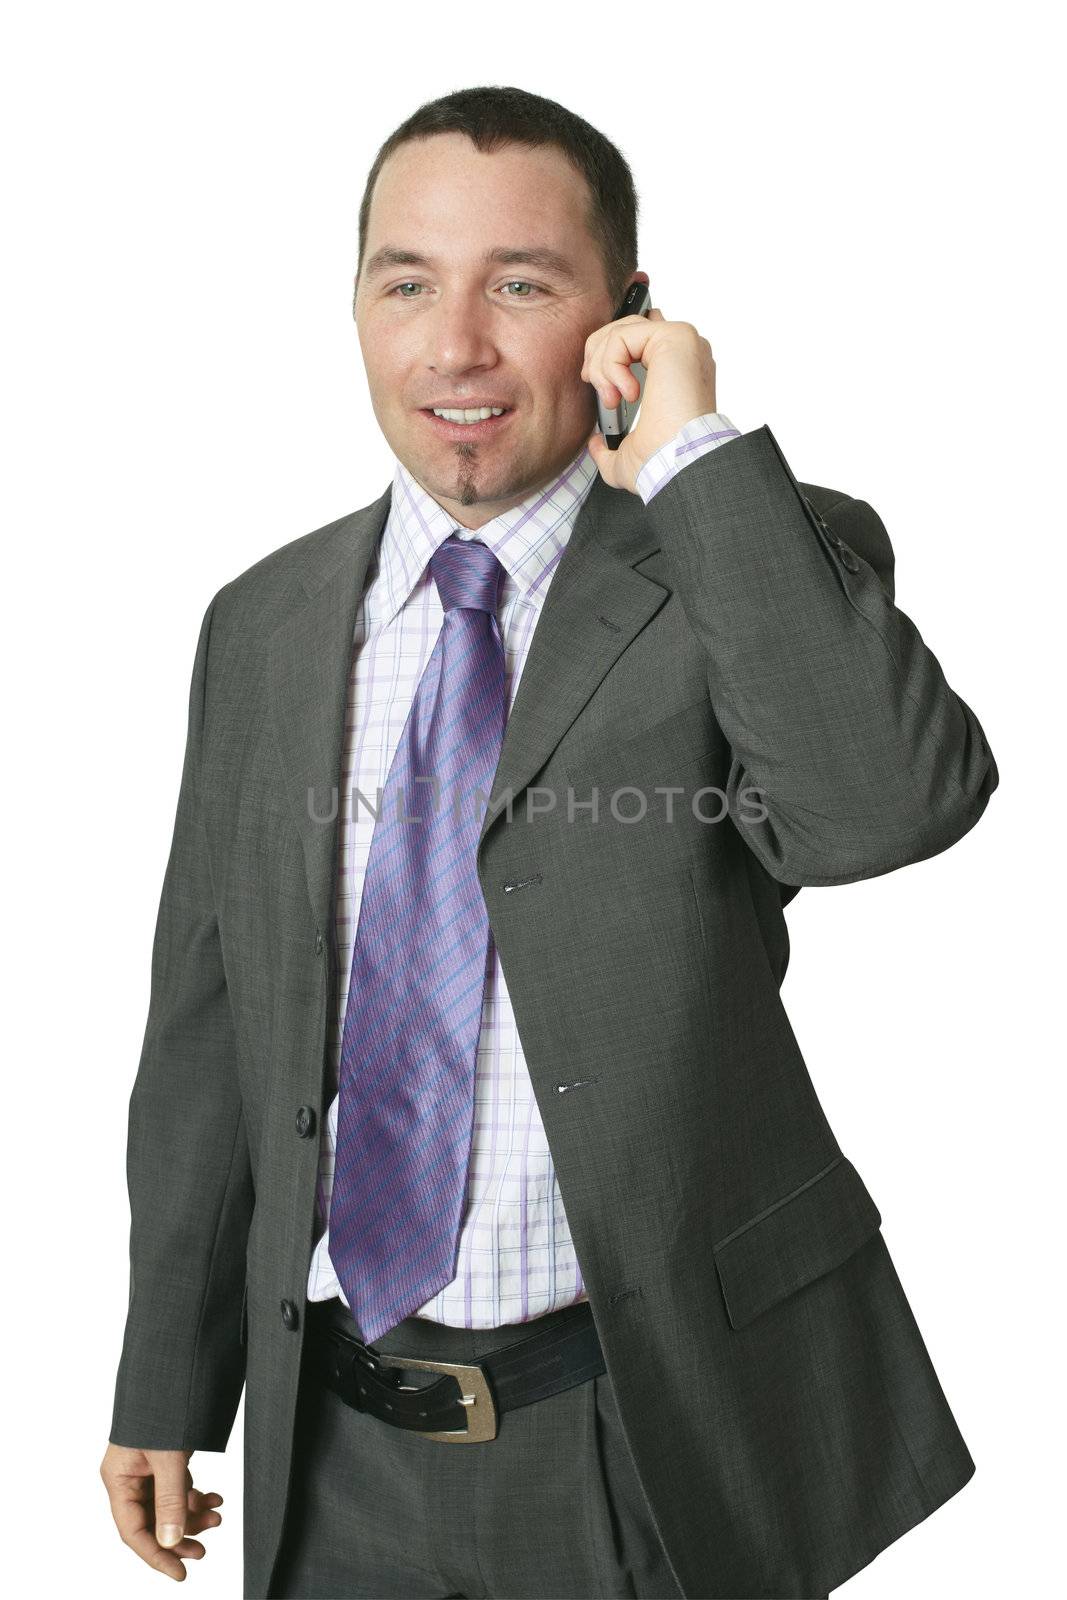 A handsome businessman receiving good news on his cellphone.